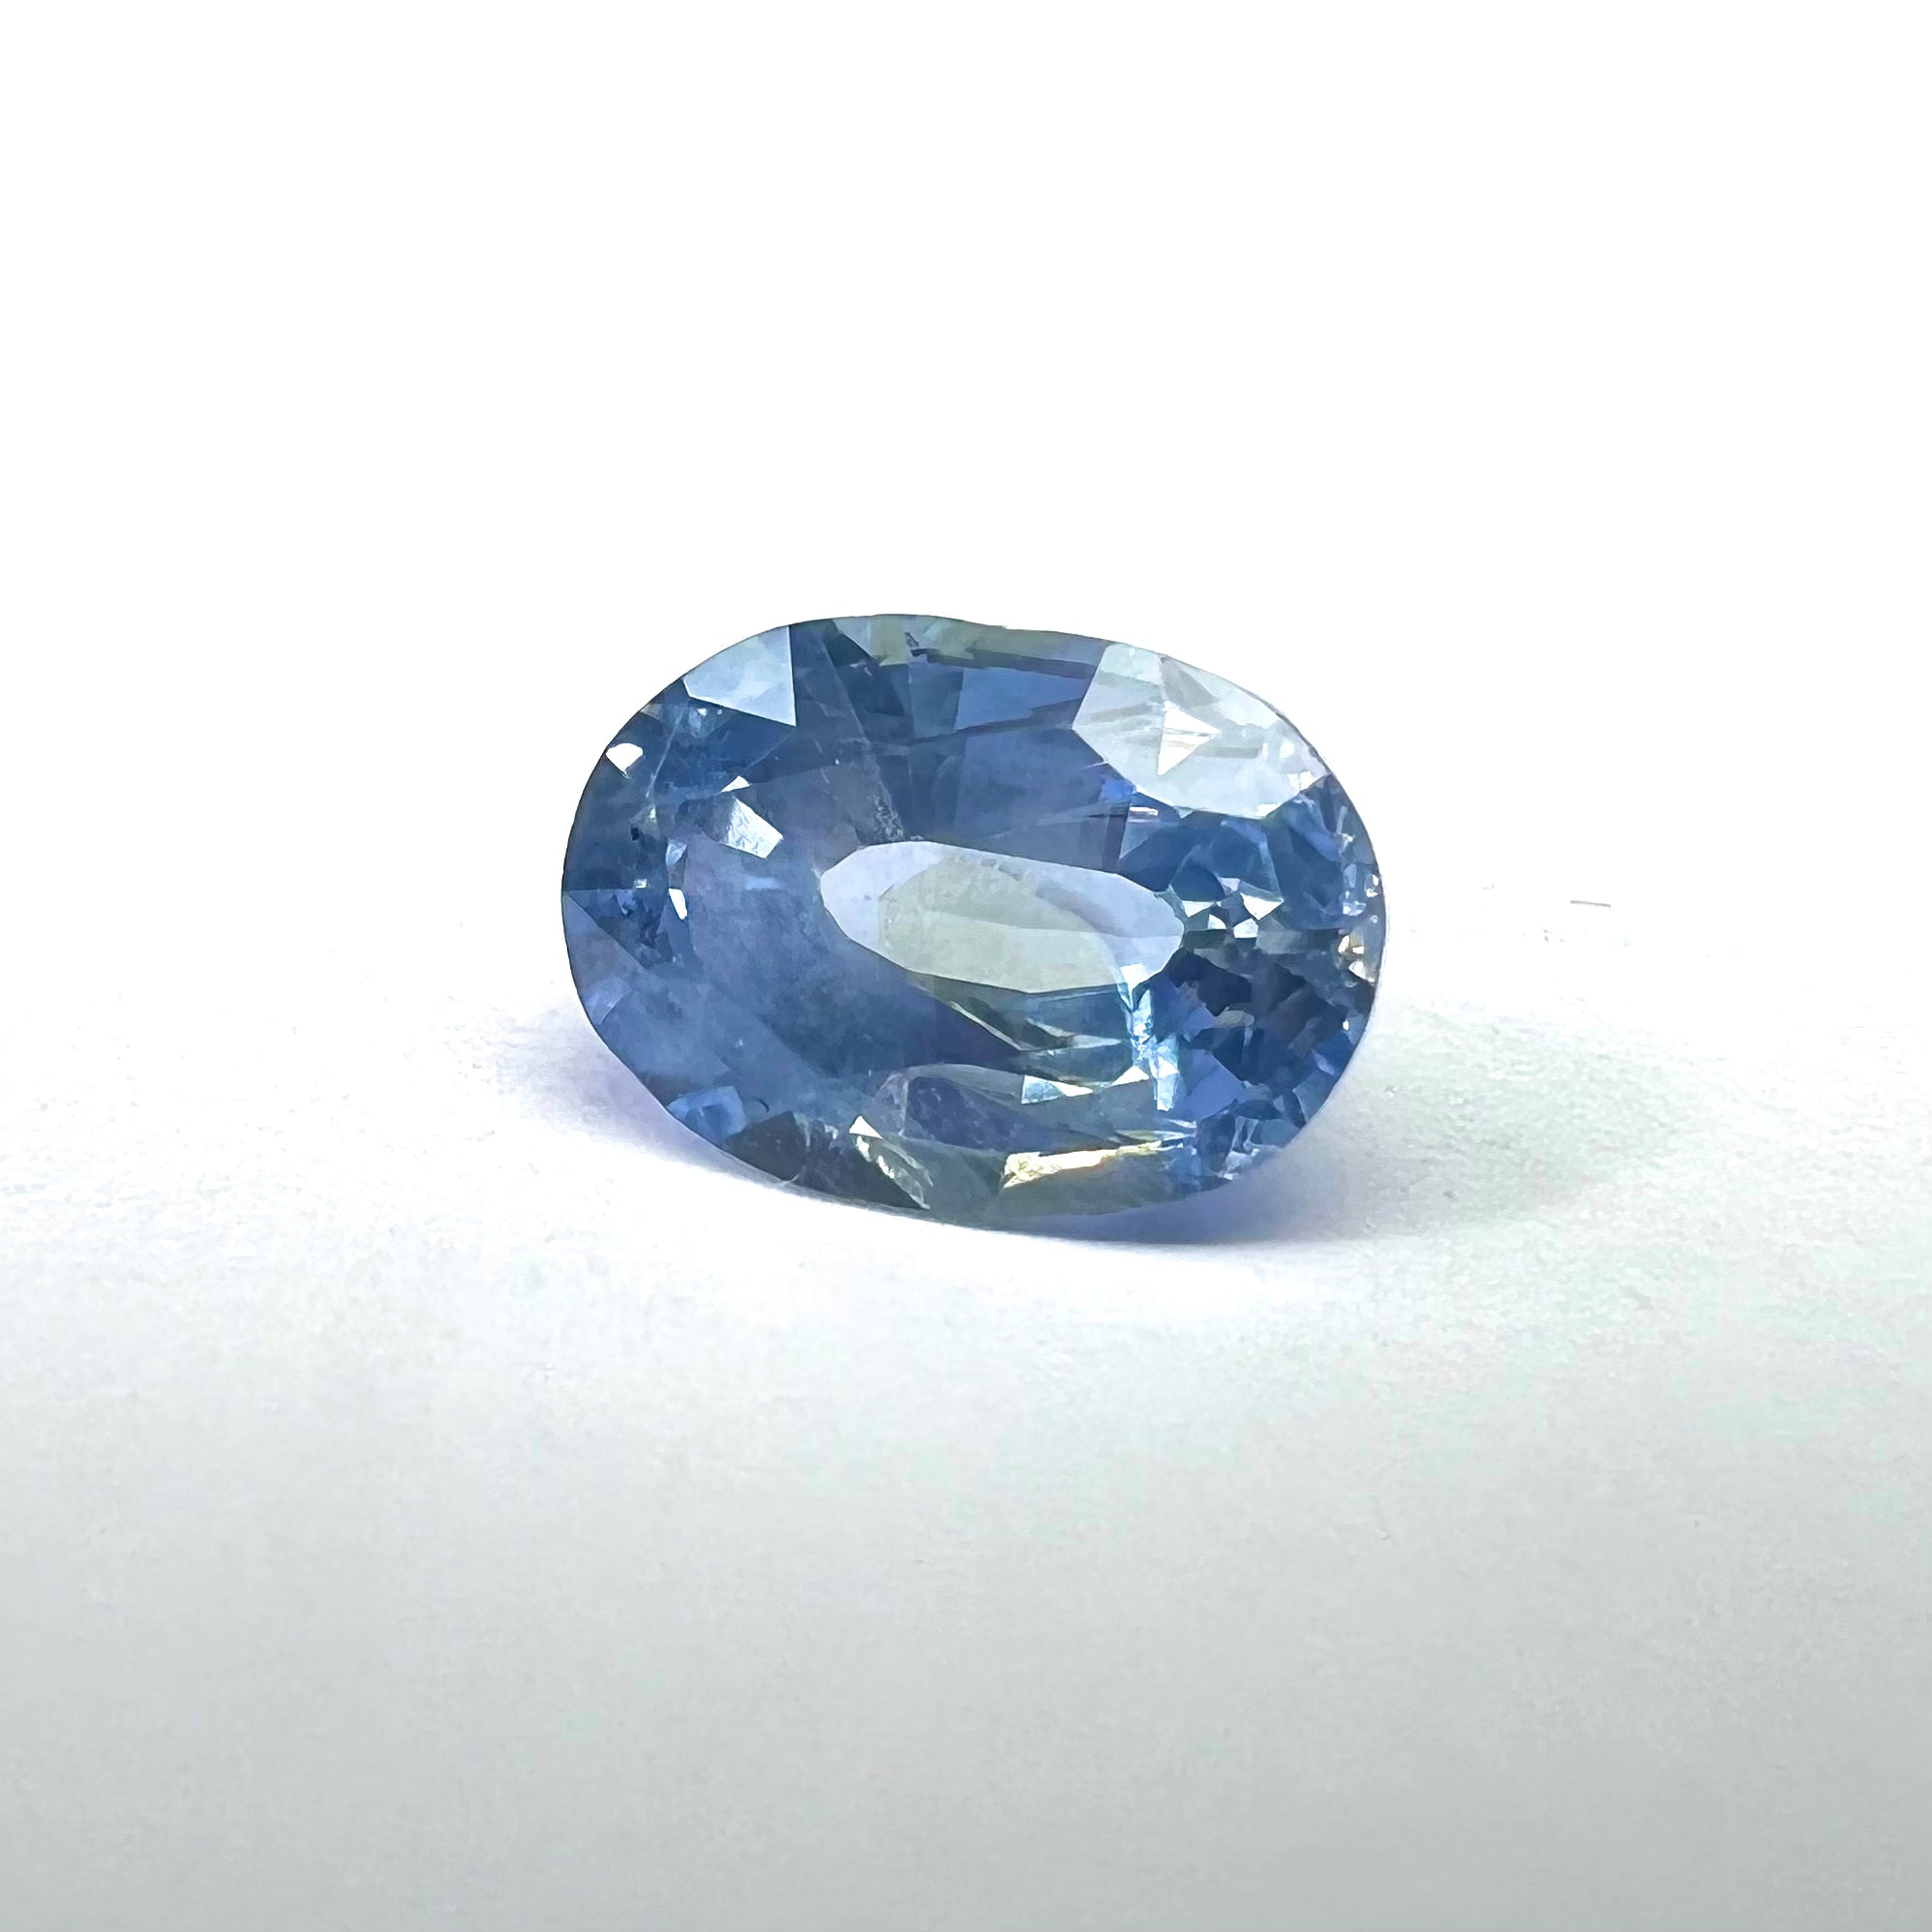 1.35CTW Loose Oval Sapphire 7.38x5.2x4mm Earth mined Gemstone